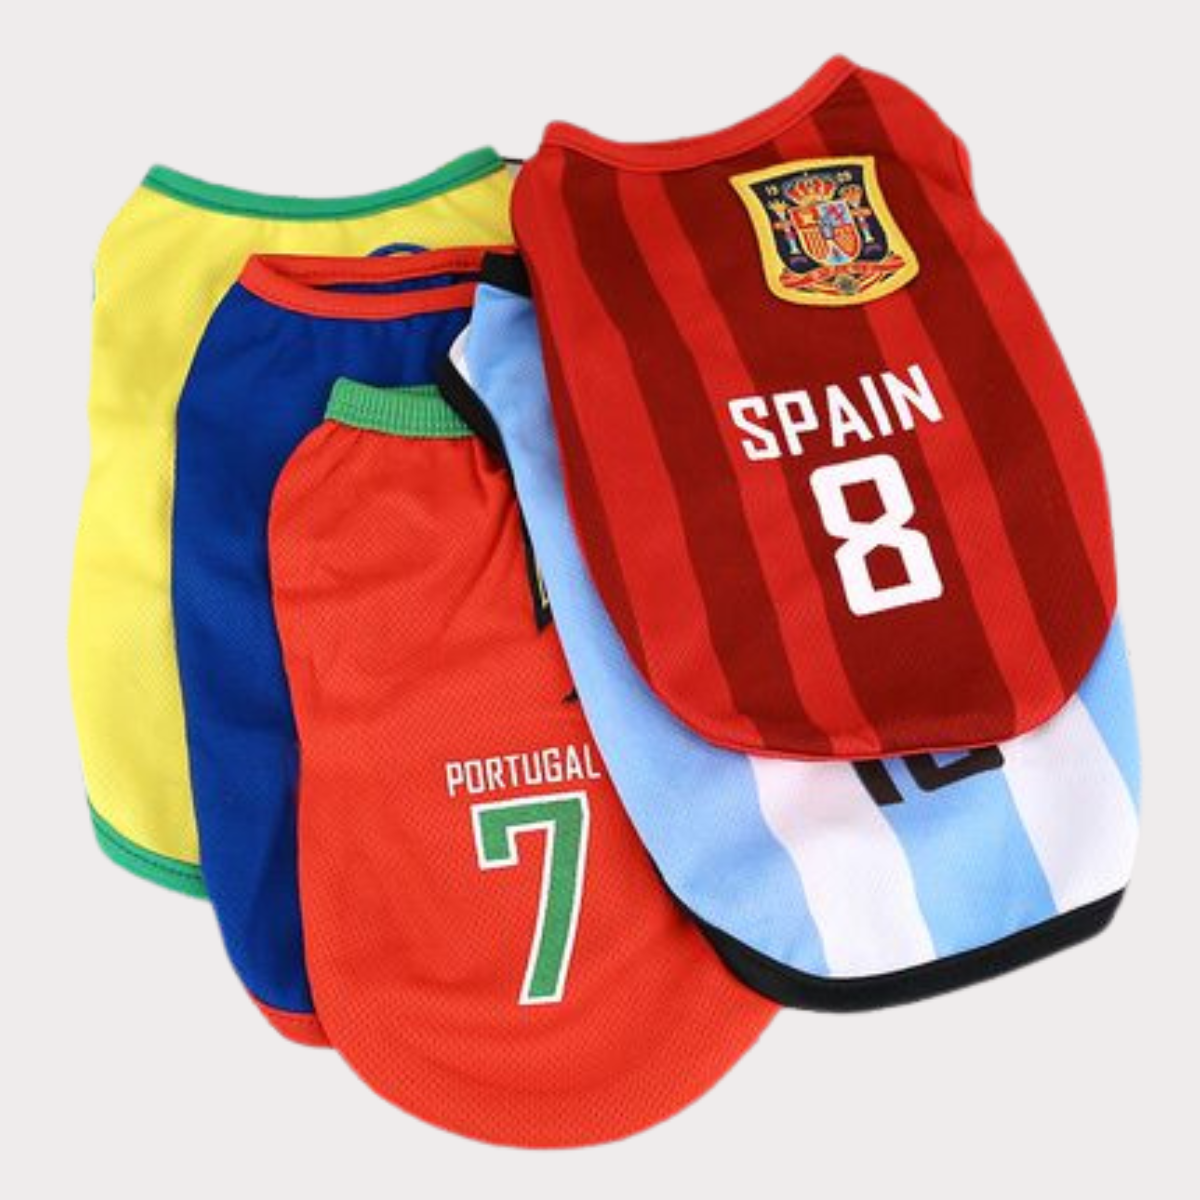 Meow Cup Jersey (Portugal)